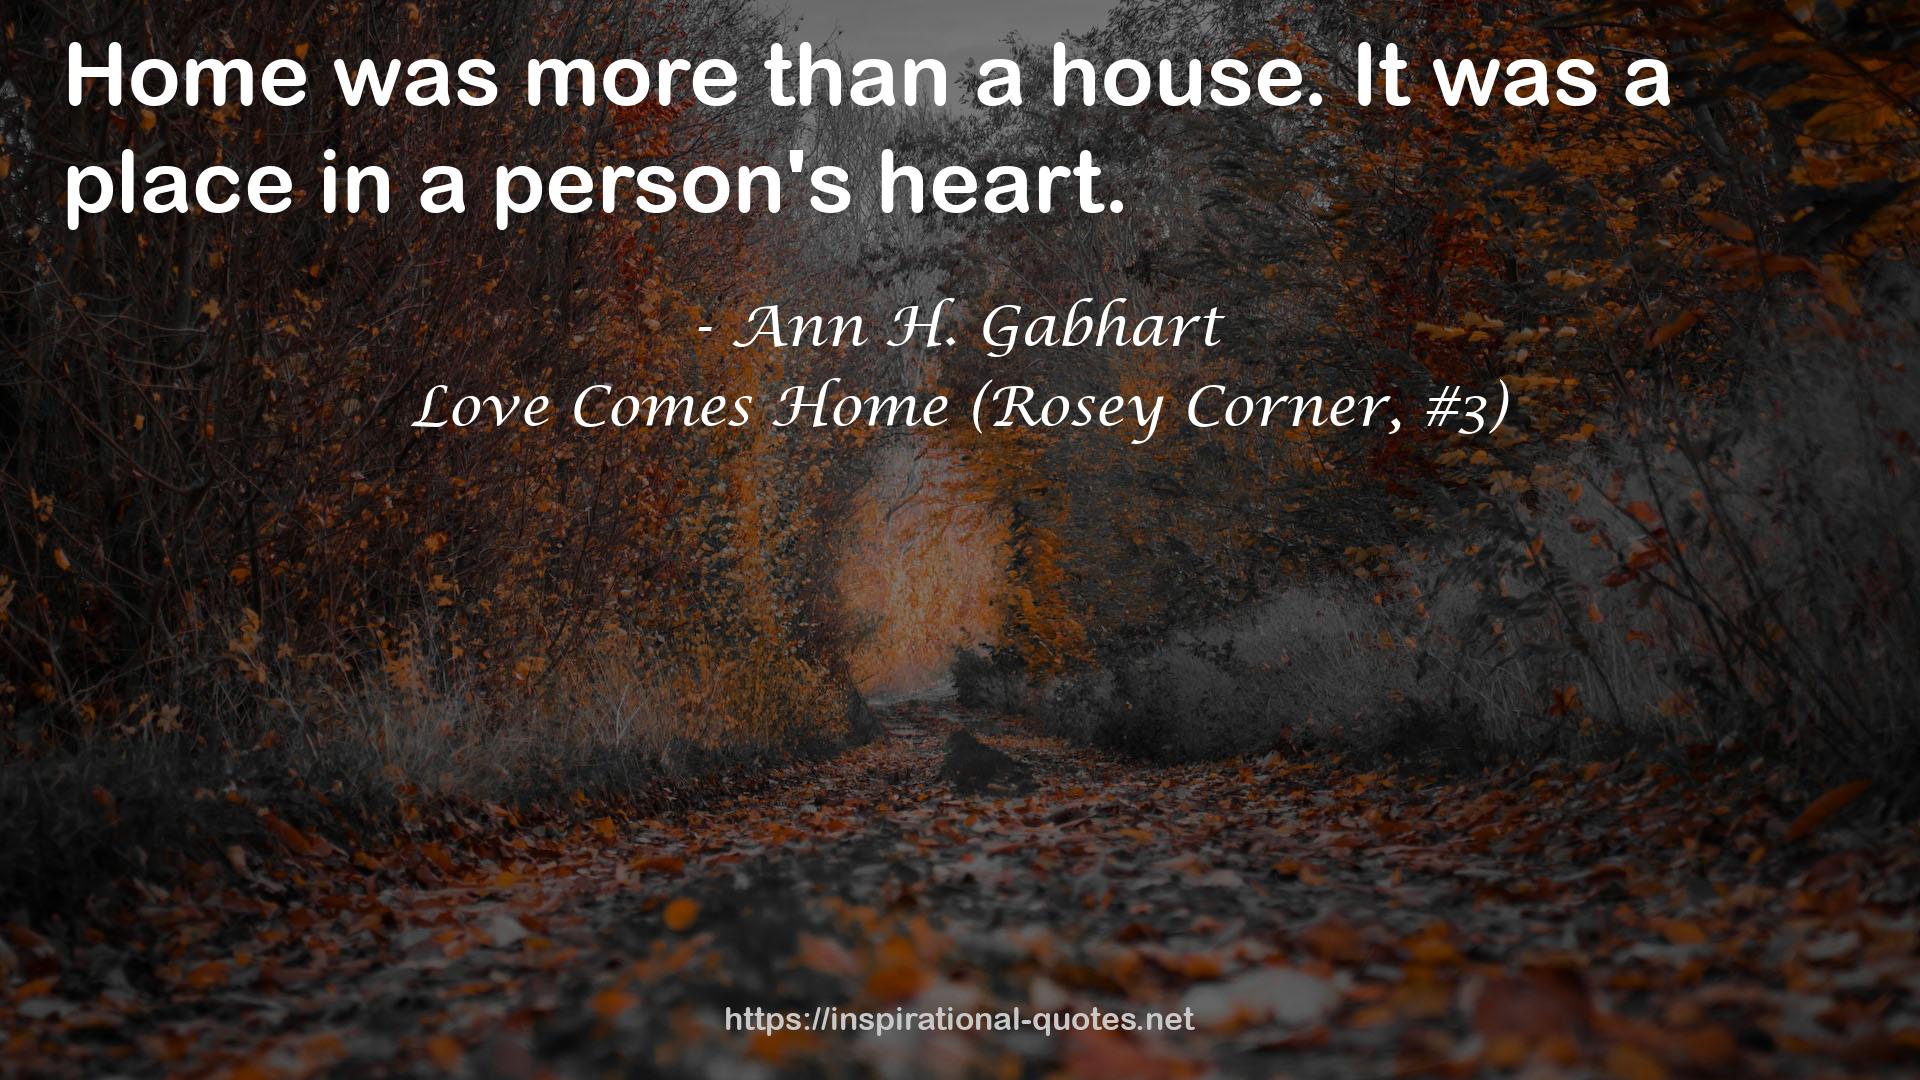 Love Comes Home (Rosey Corner, #3) QUOTES